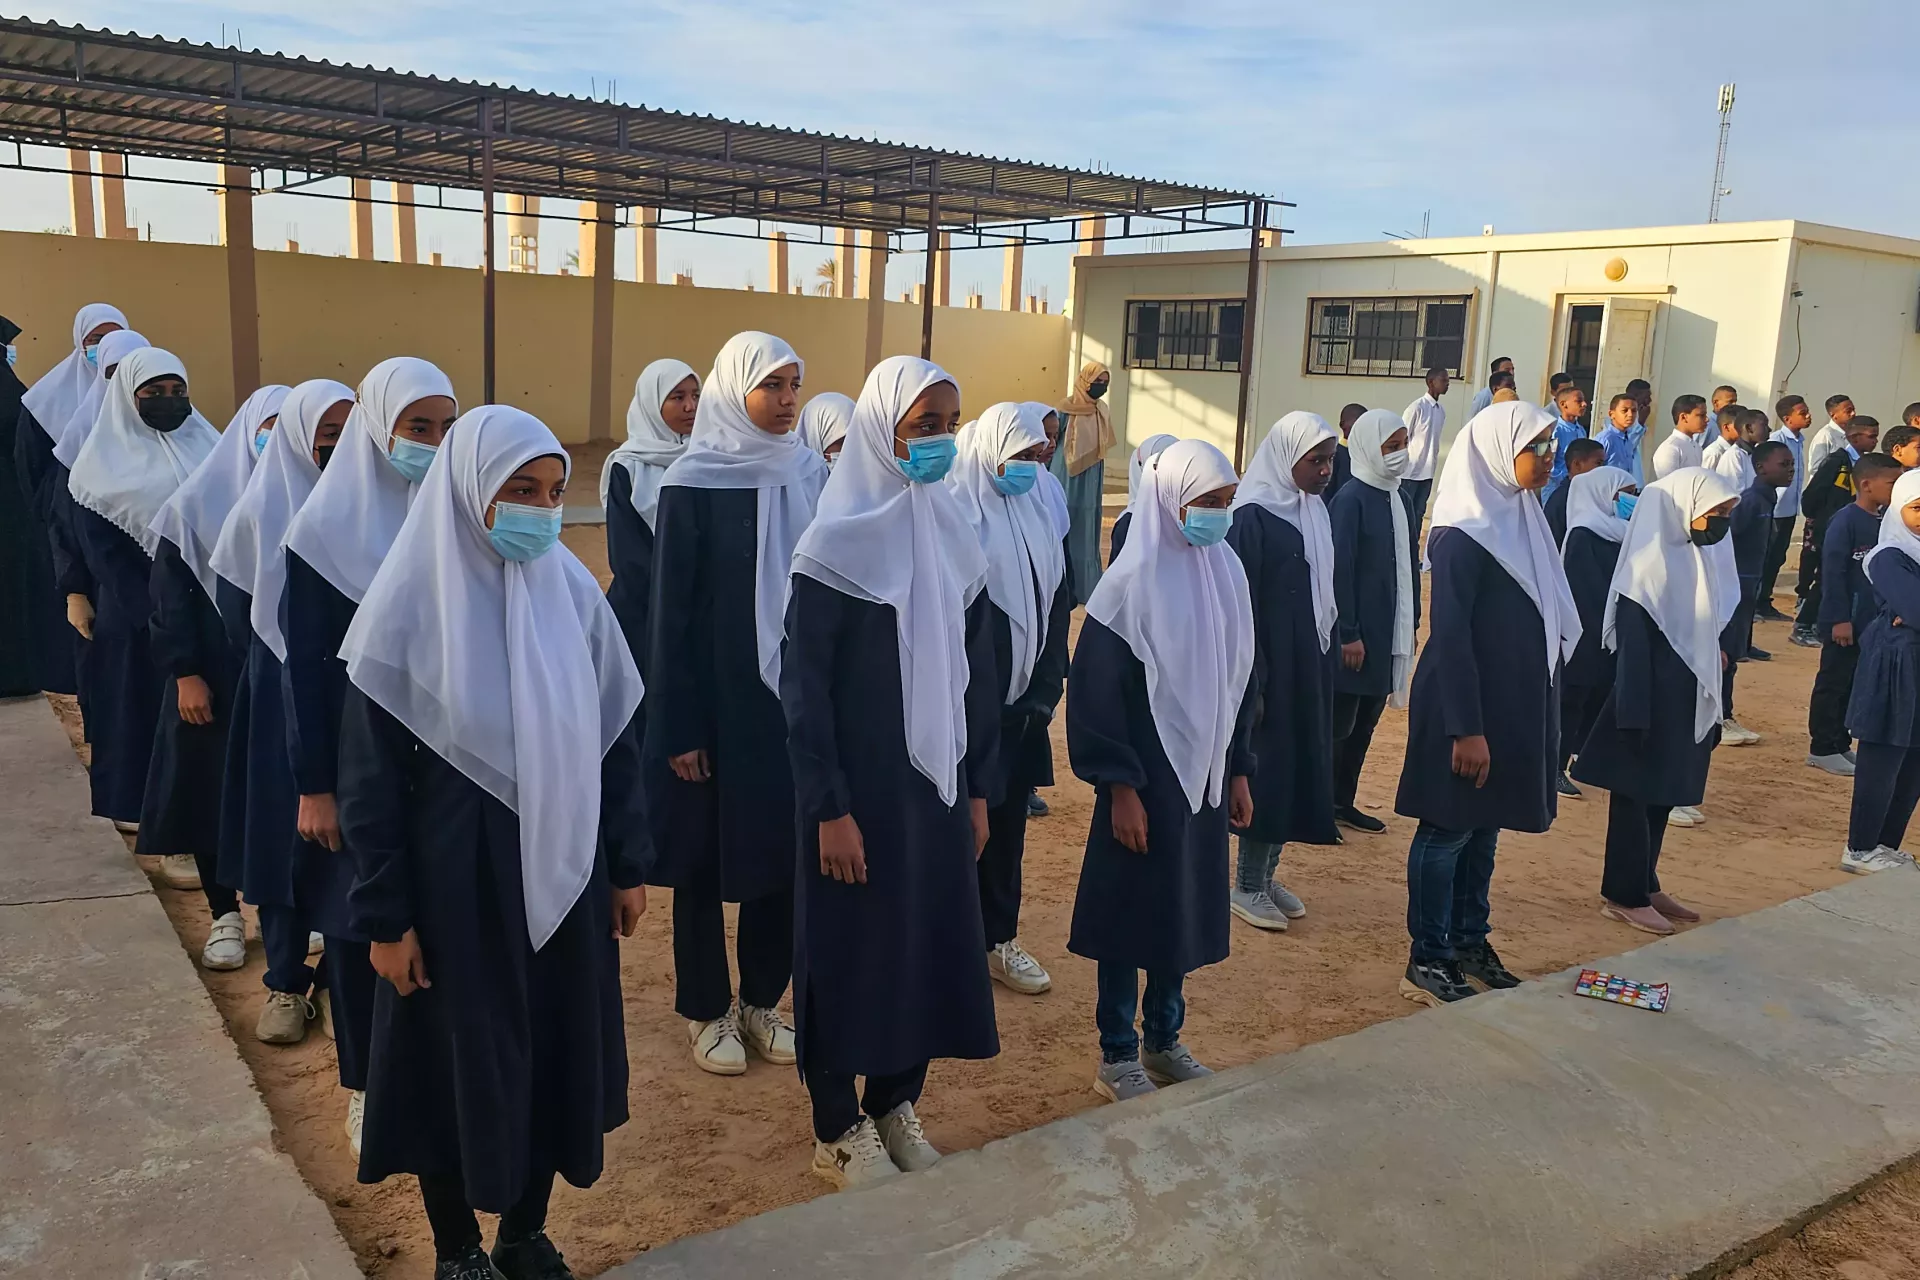 Students at Taqrouteen School line up for morning assembly infront of the new classrooms, ready to learn in their improved school facilities. Photo: ©UNICEF/Wadi Otbah/2023/Abdullah Hussein